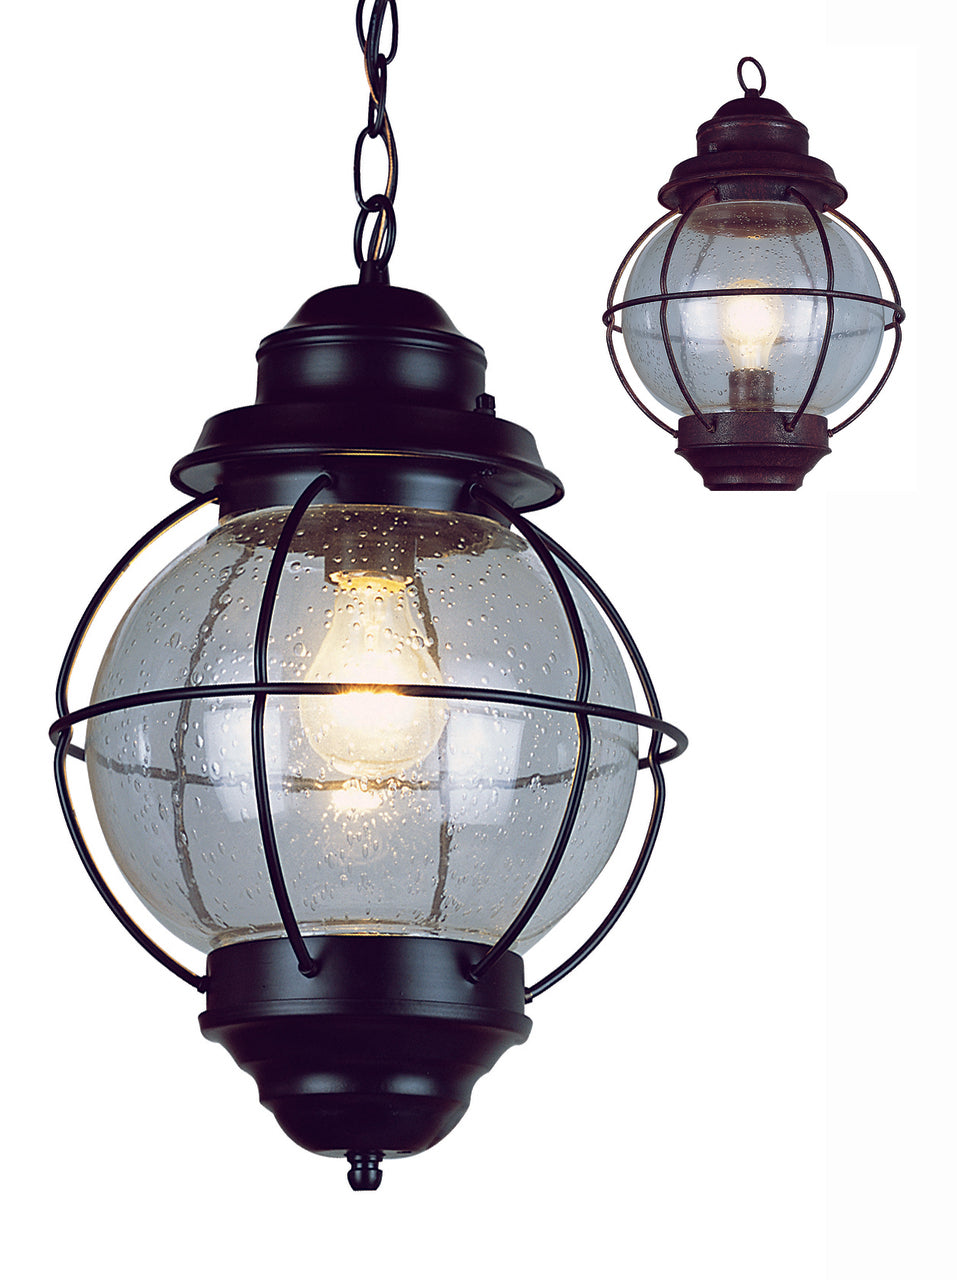 Trans Globe Lighting 69903 RBZ Catalina 13.5" Outdoor Rustic Bronze Nautical Hanging Lantern with Round Seeded Glass Design